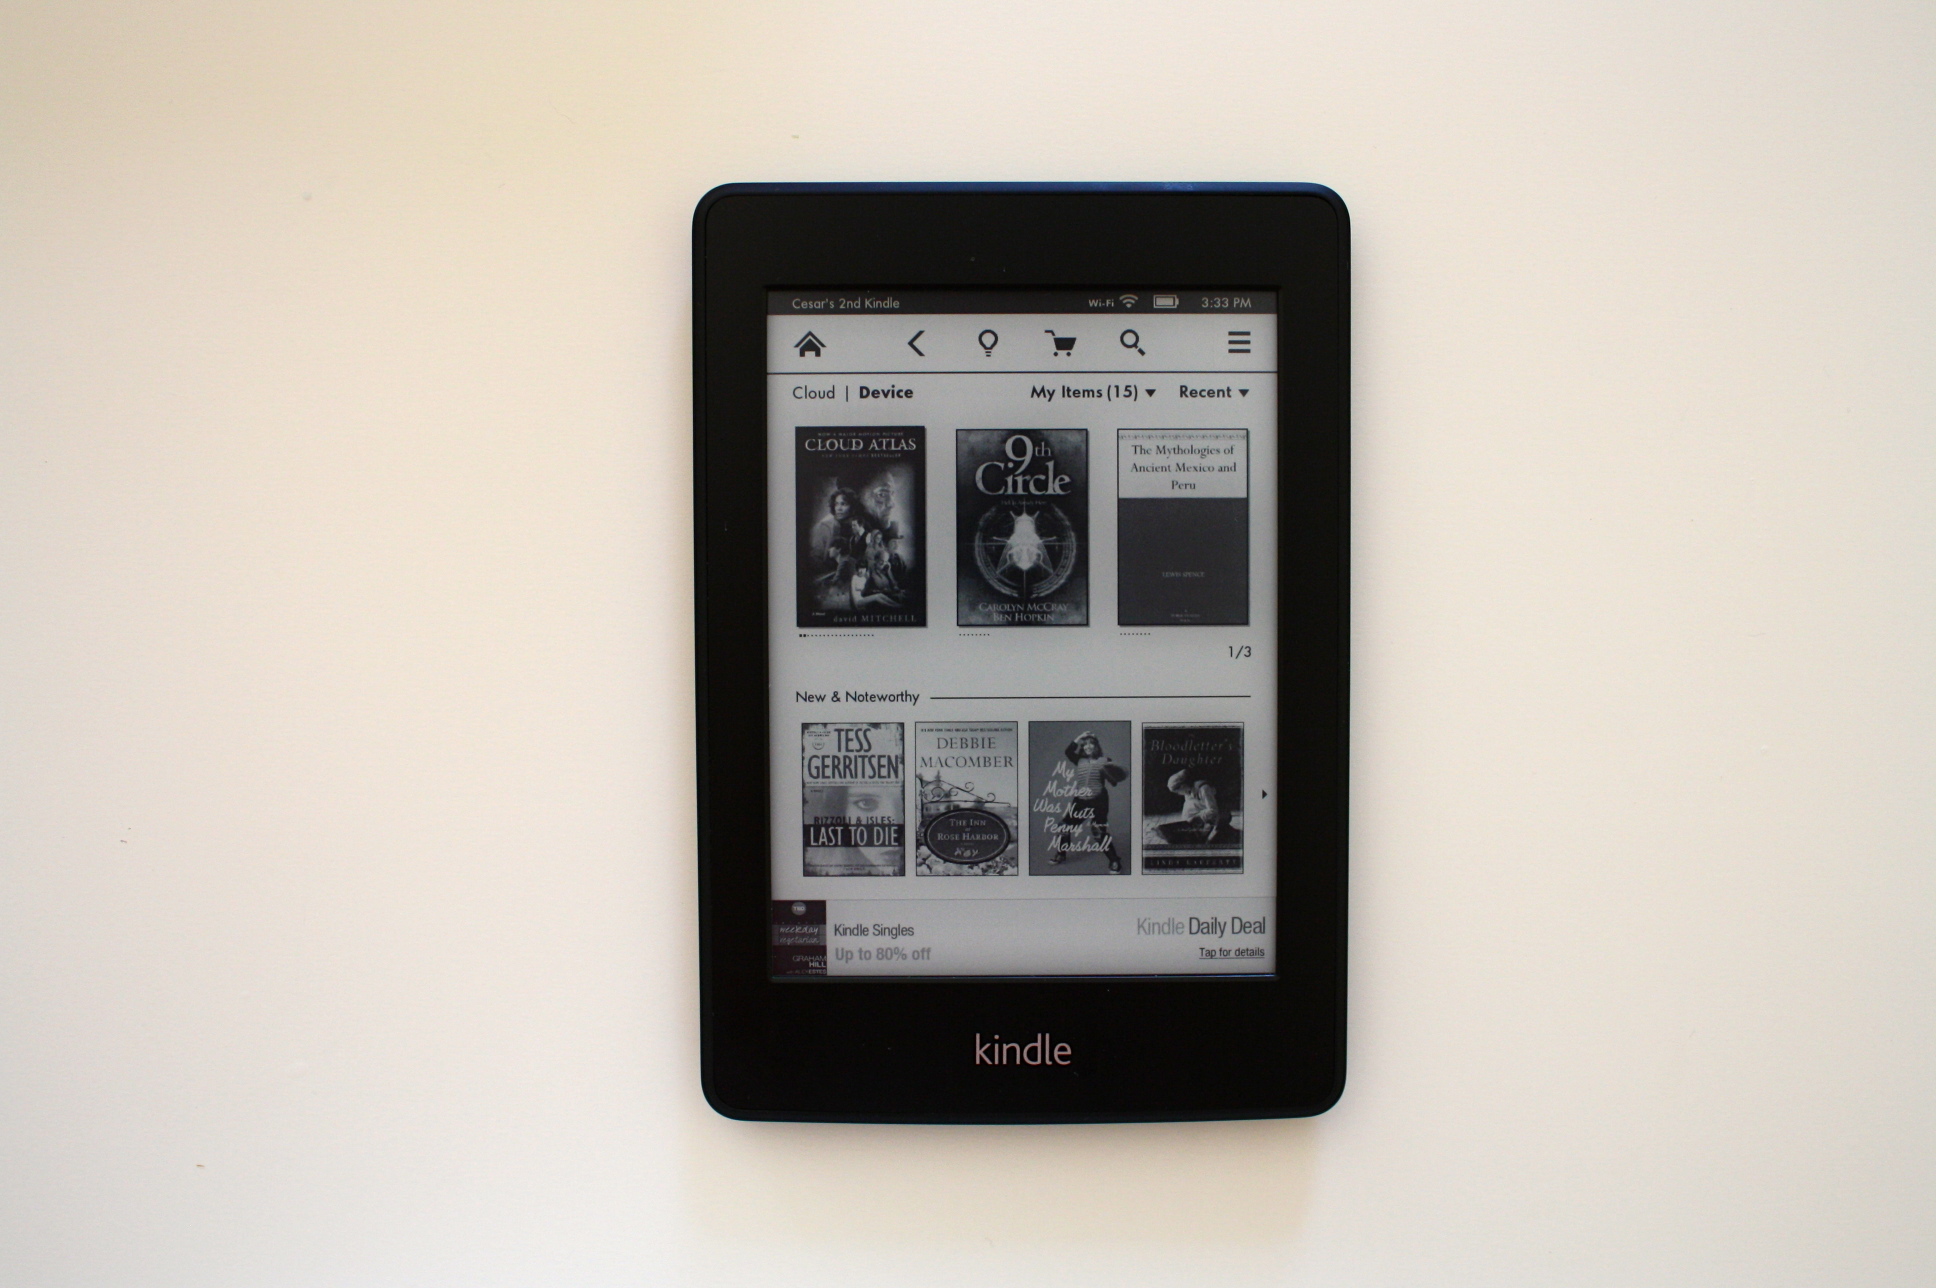 Brighter, sharper, and ad-filled: The Kindle Paperwhite review | Ars